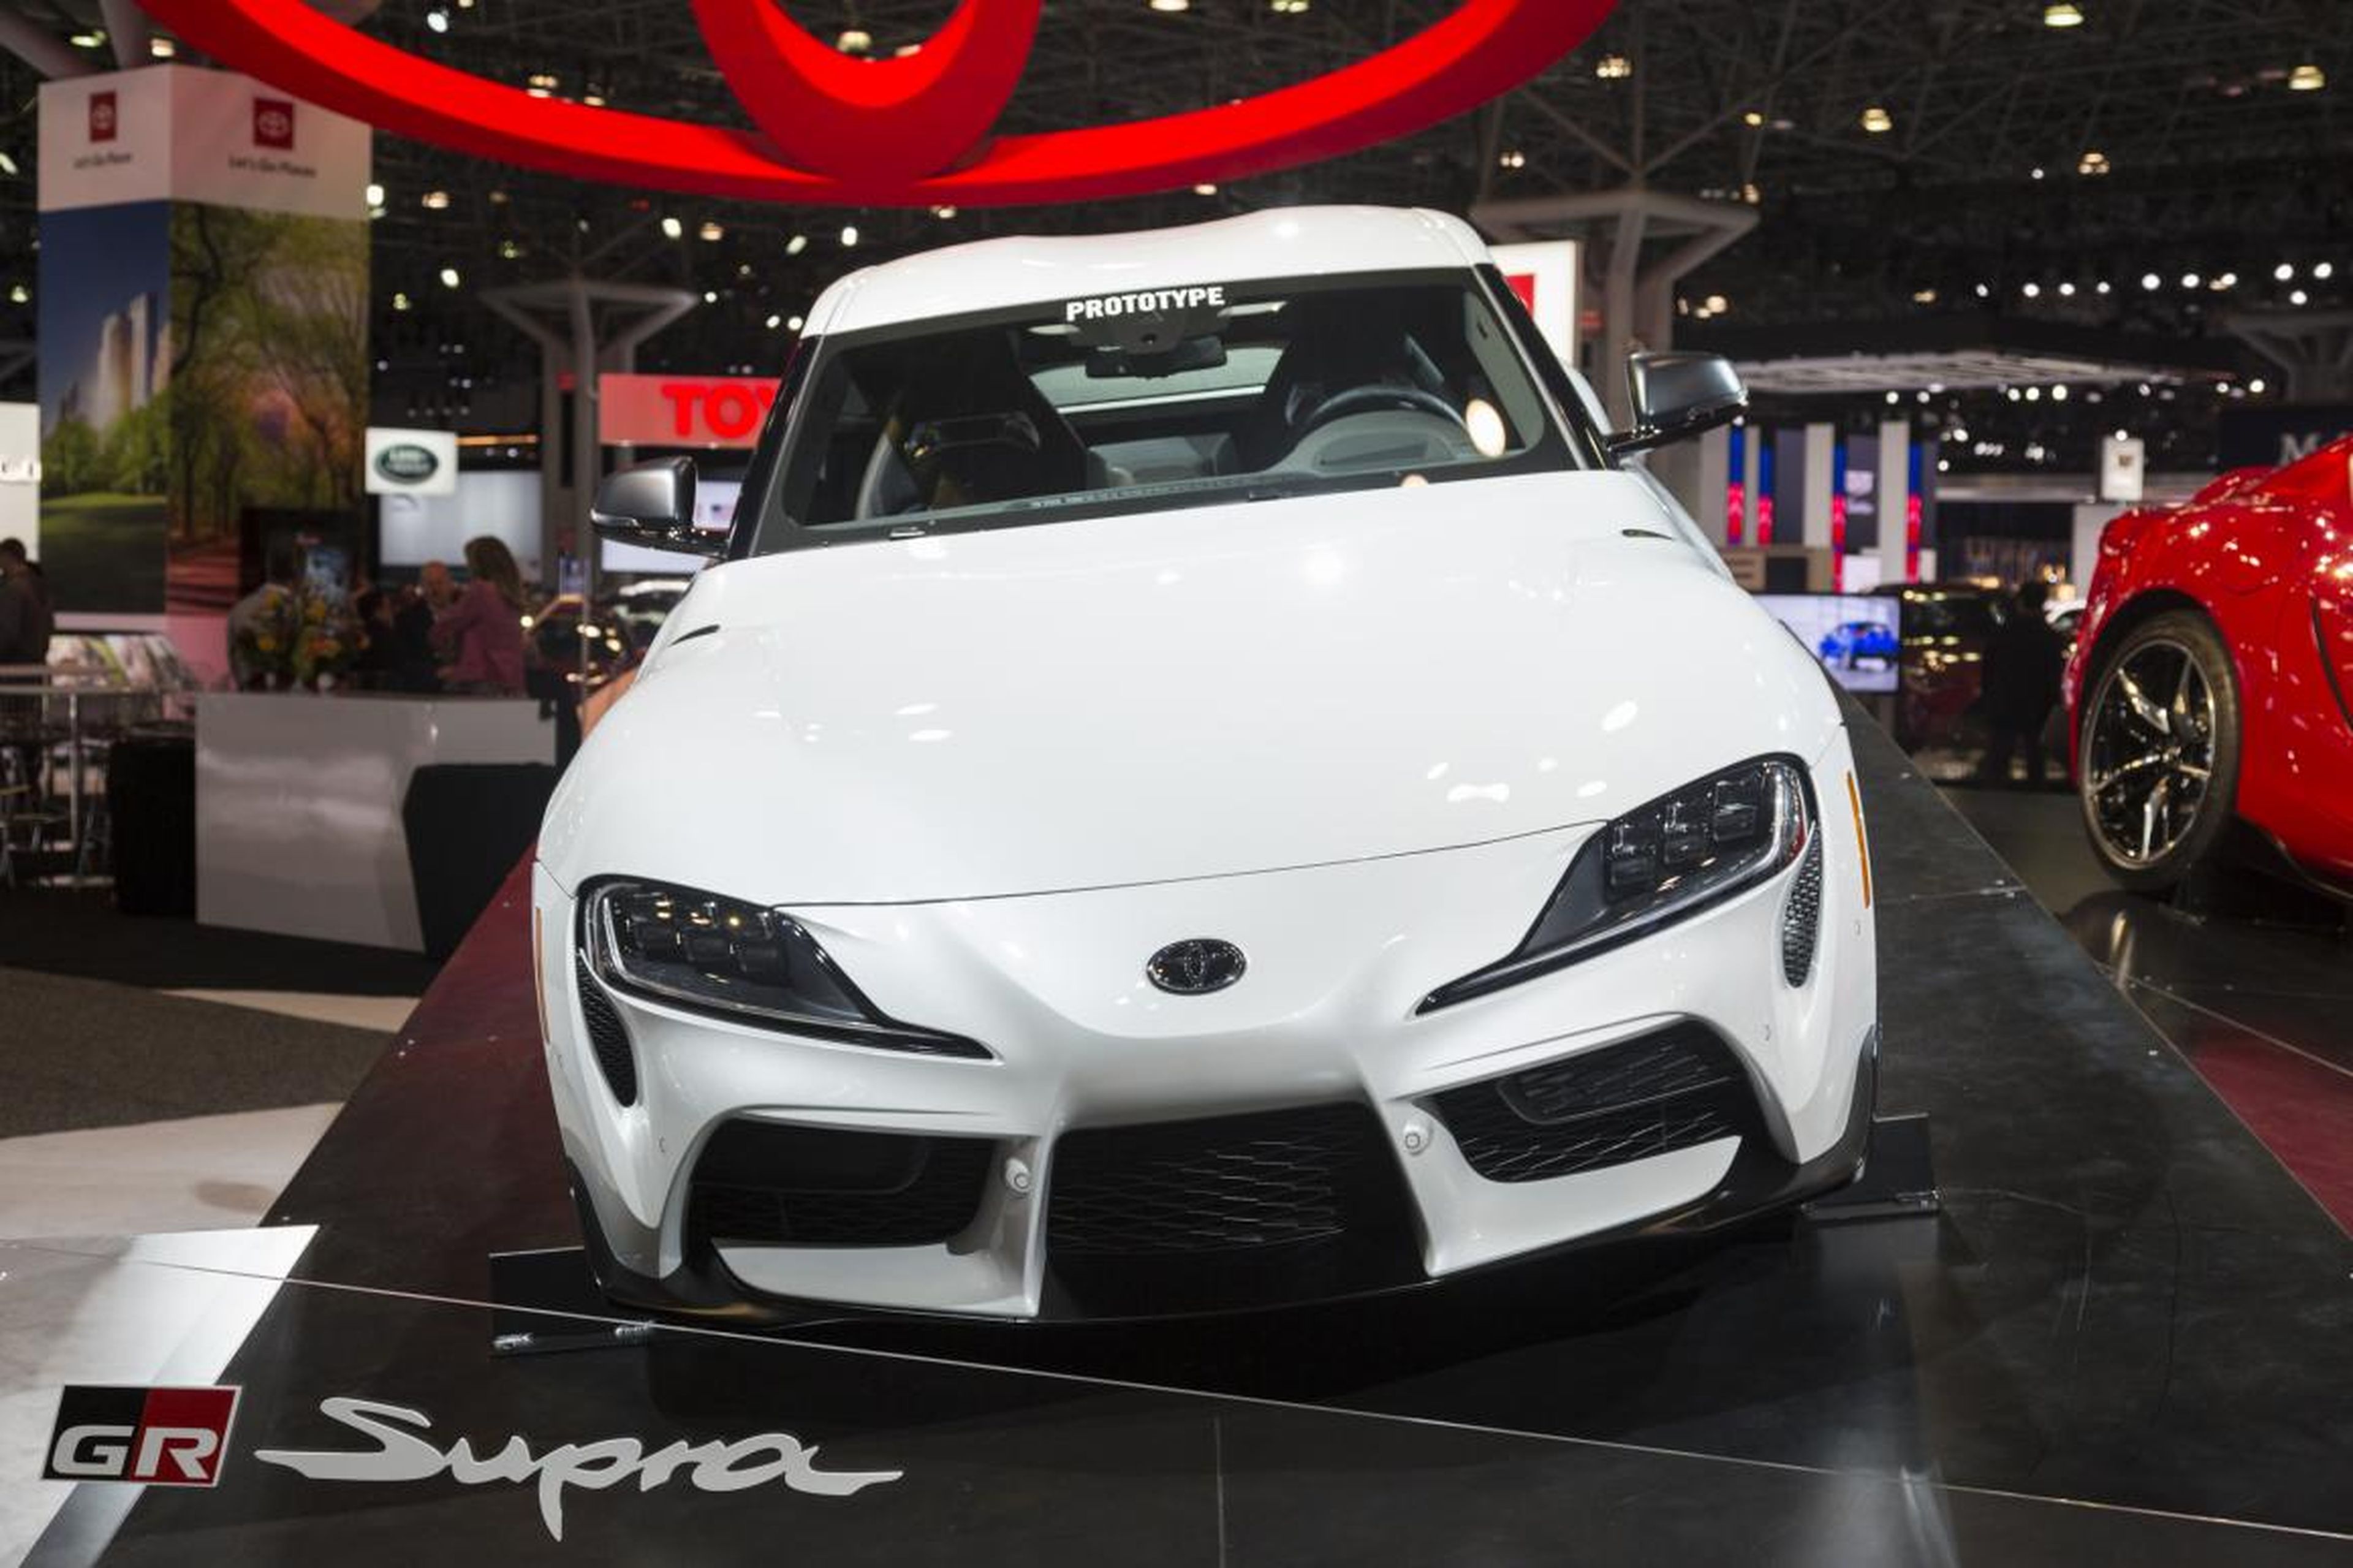 But the car had officially been out of production since 2002. At the 2019 Detroit auto show, Toyota revealed the rebooted Supra — but the initial reaction was subdued.